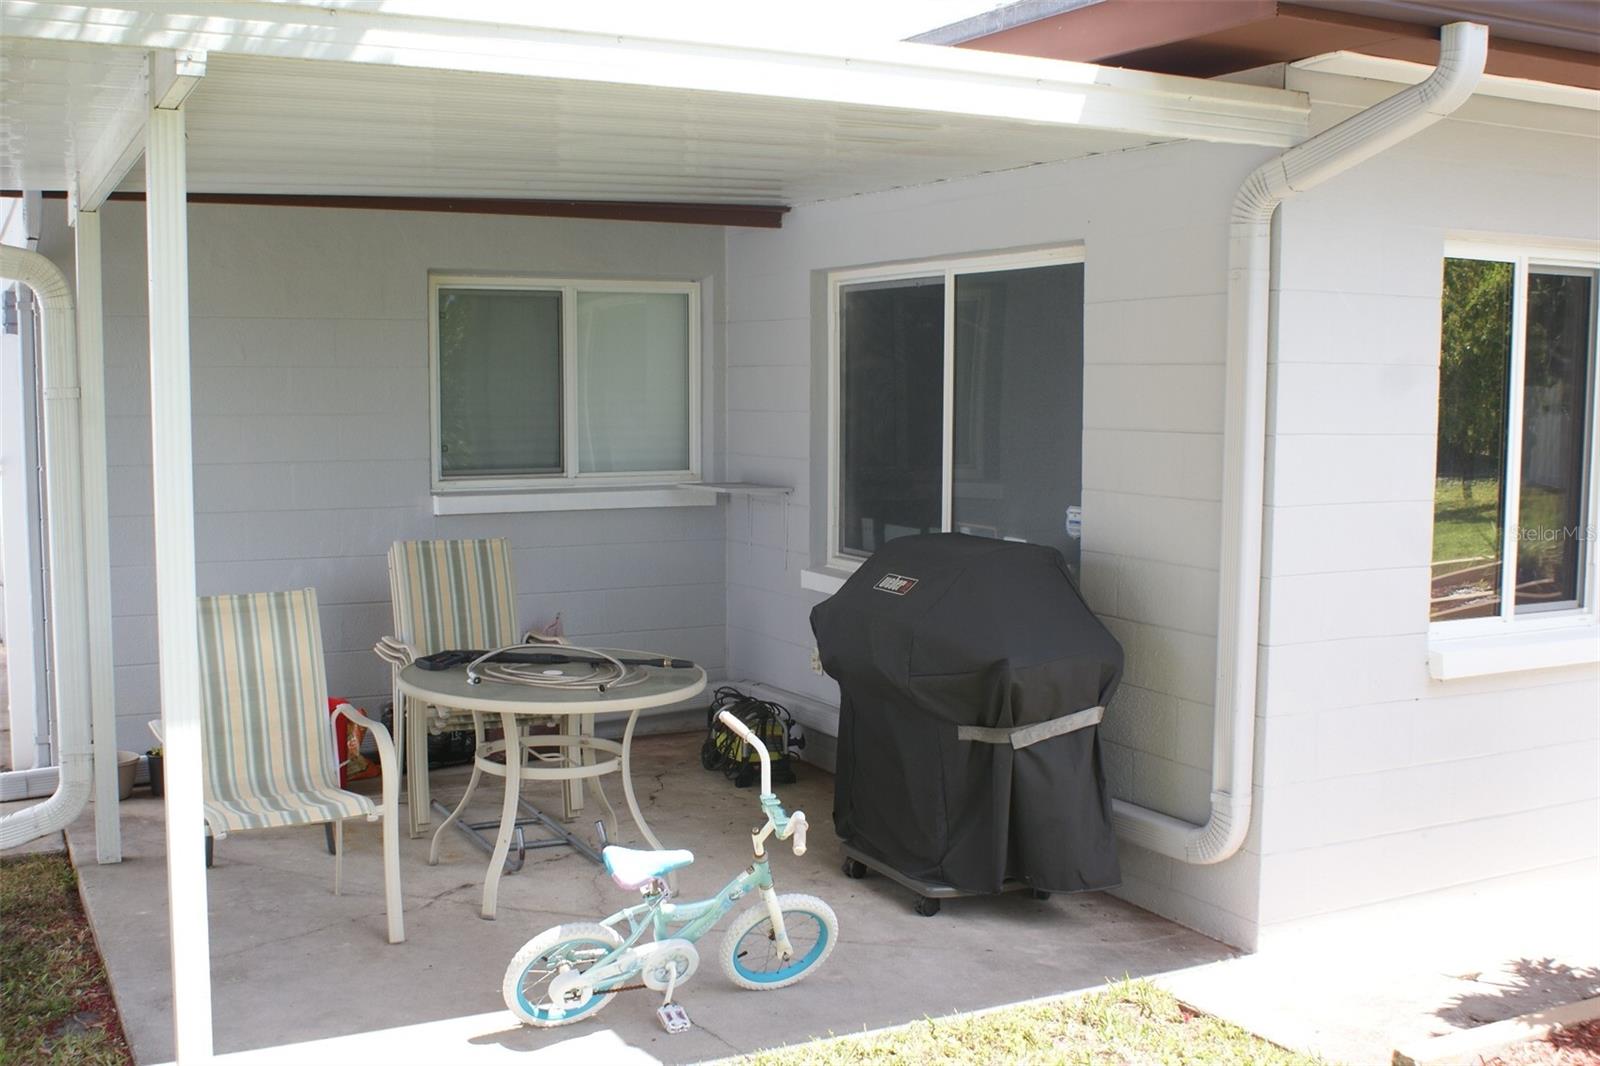 Covered rear patio